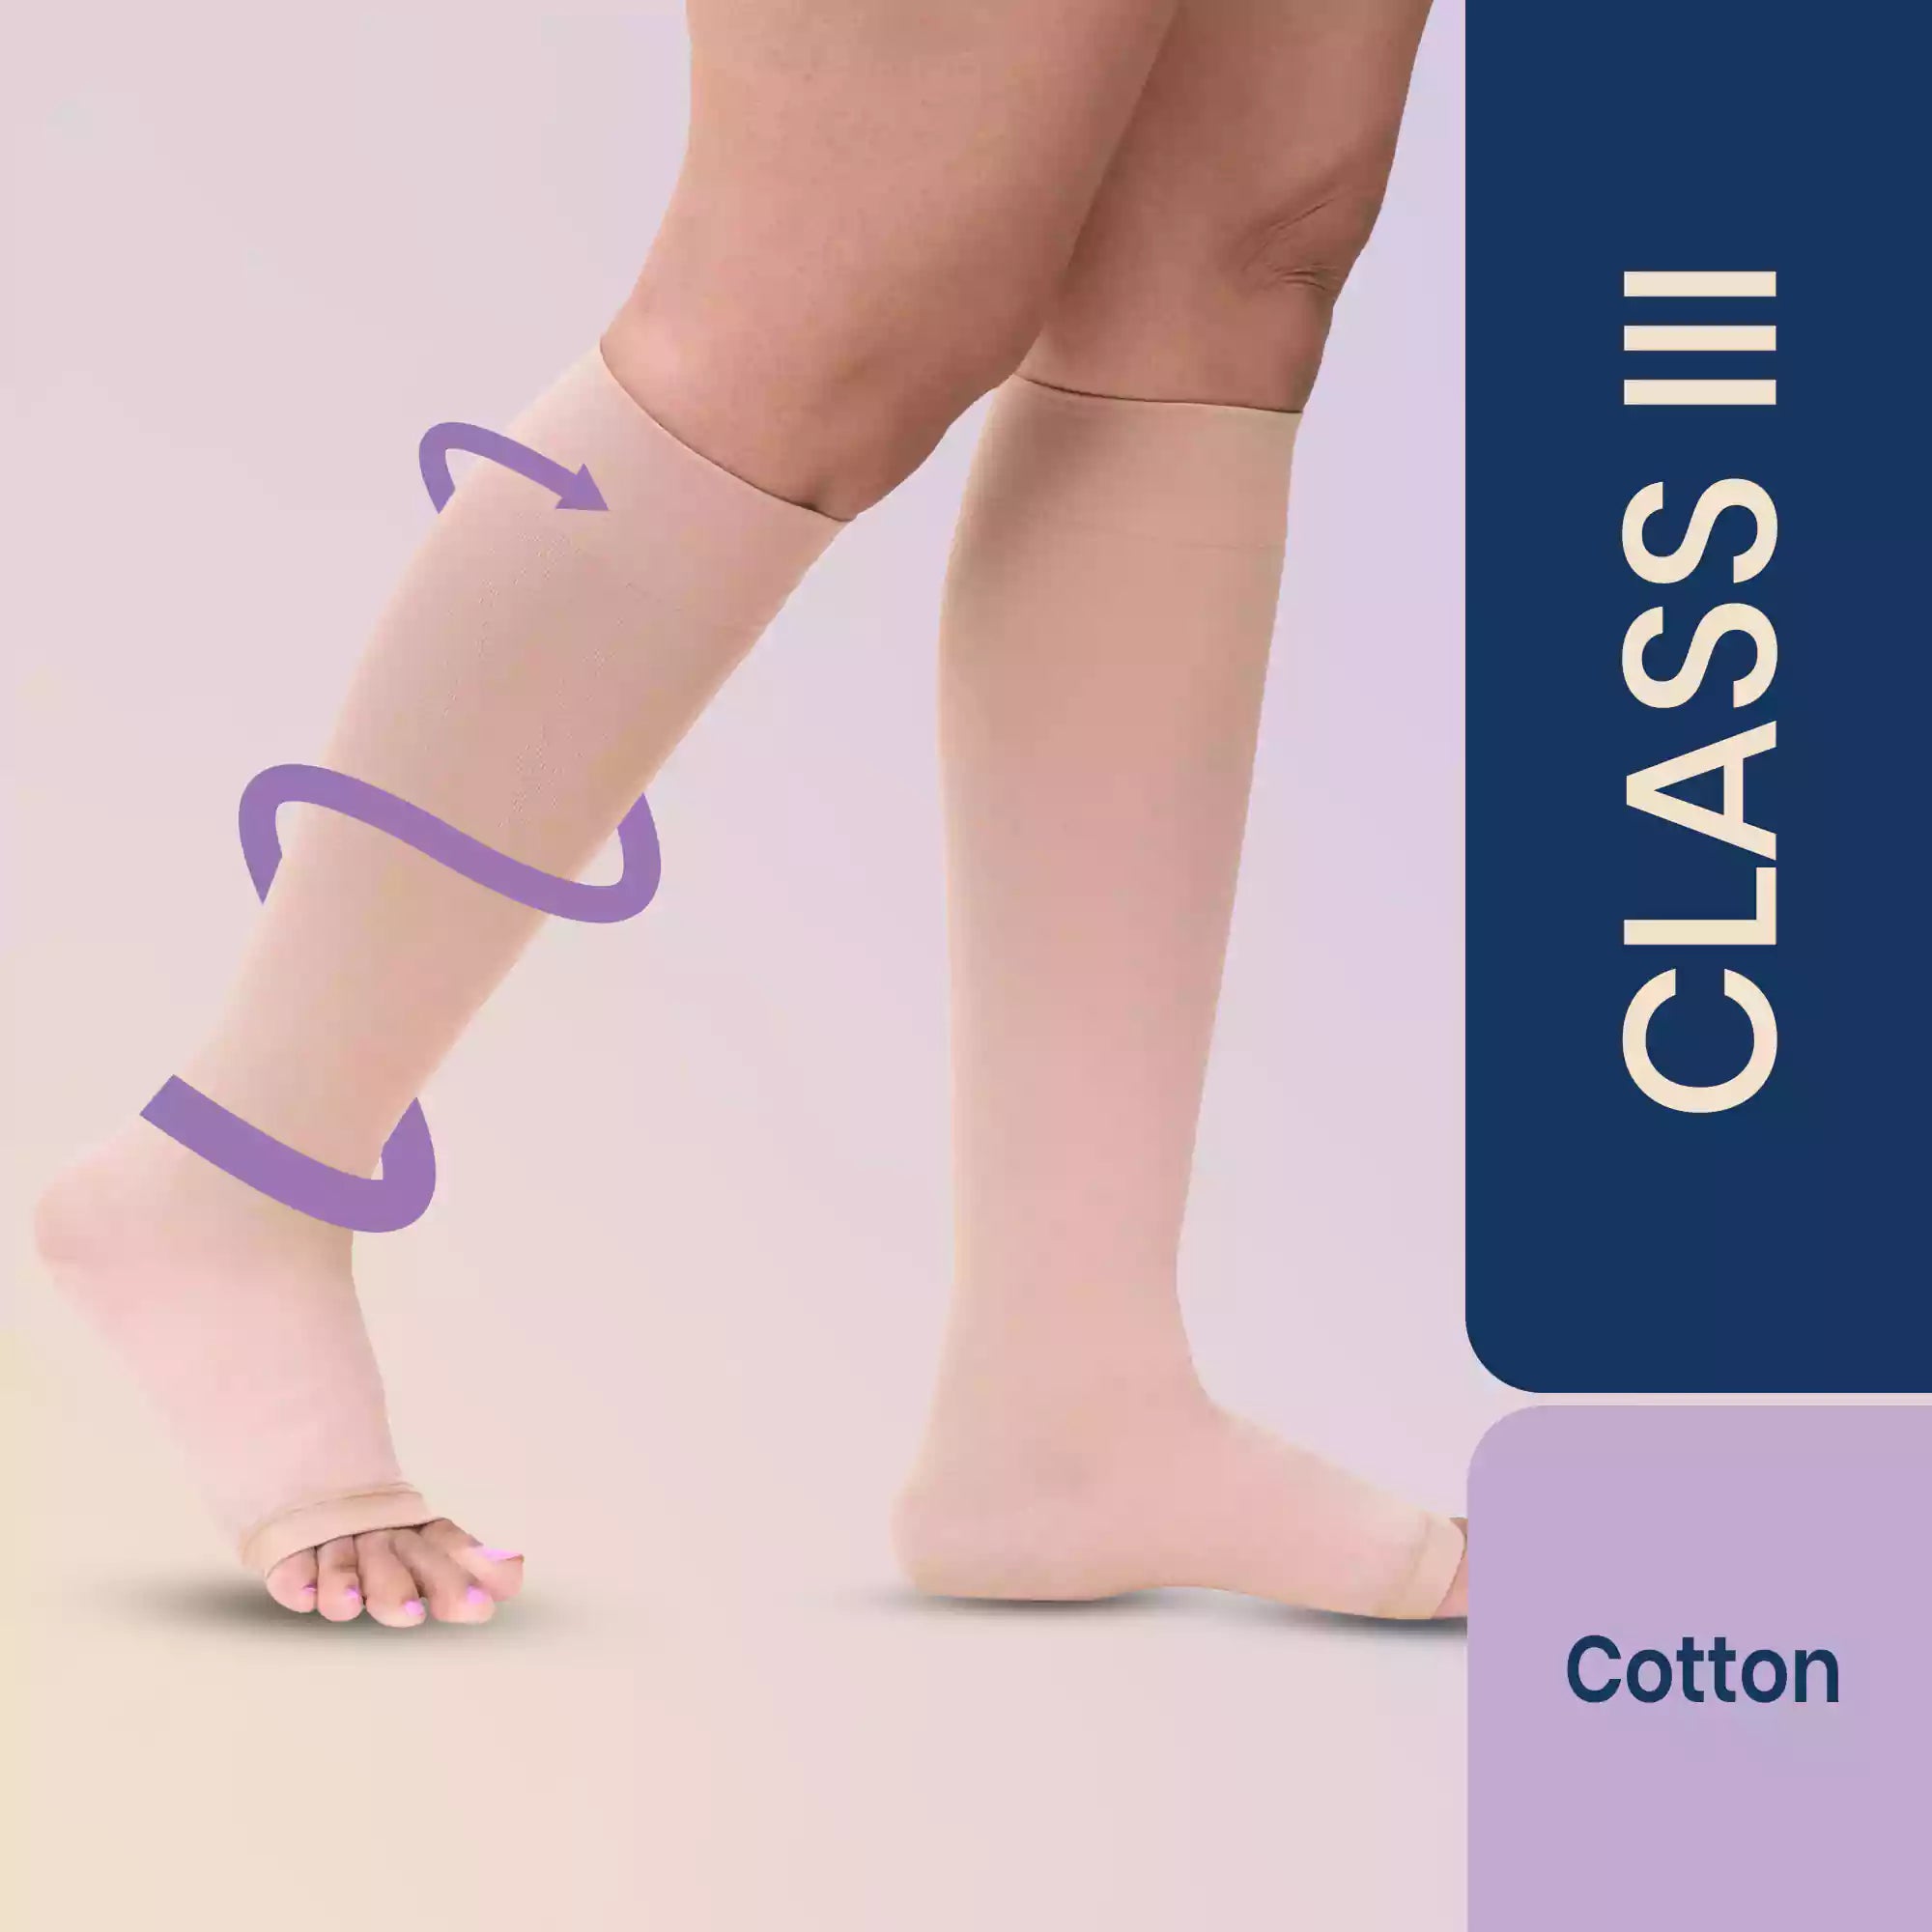 Medtex Class-3 Cotton compression stockings for Varicose Veins - Knee/Thigh  Length